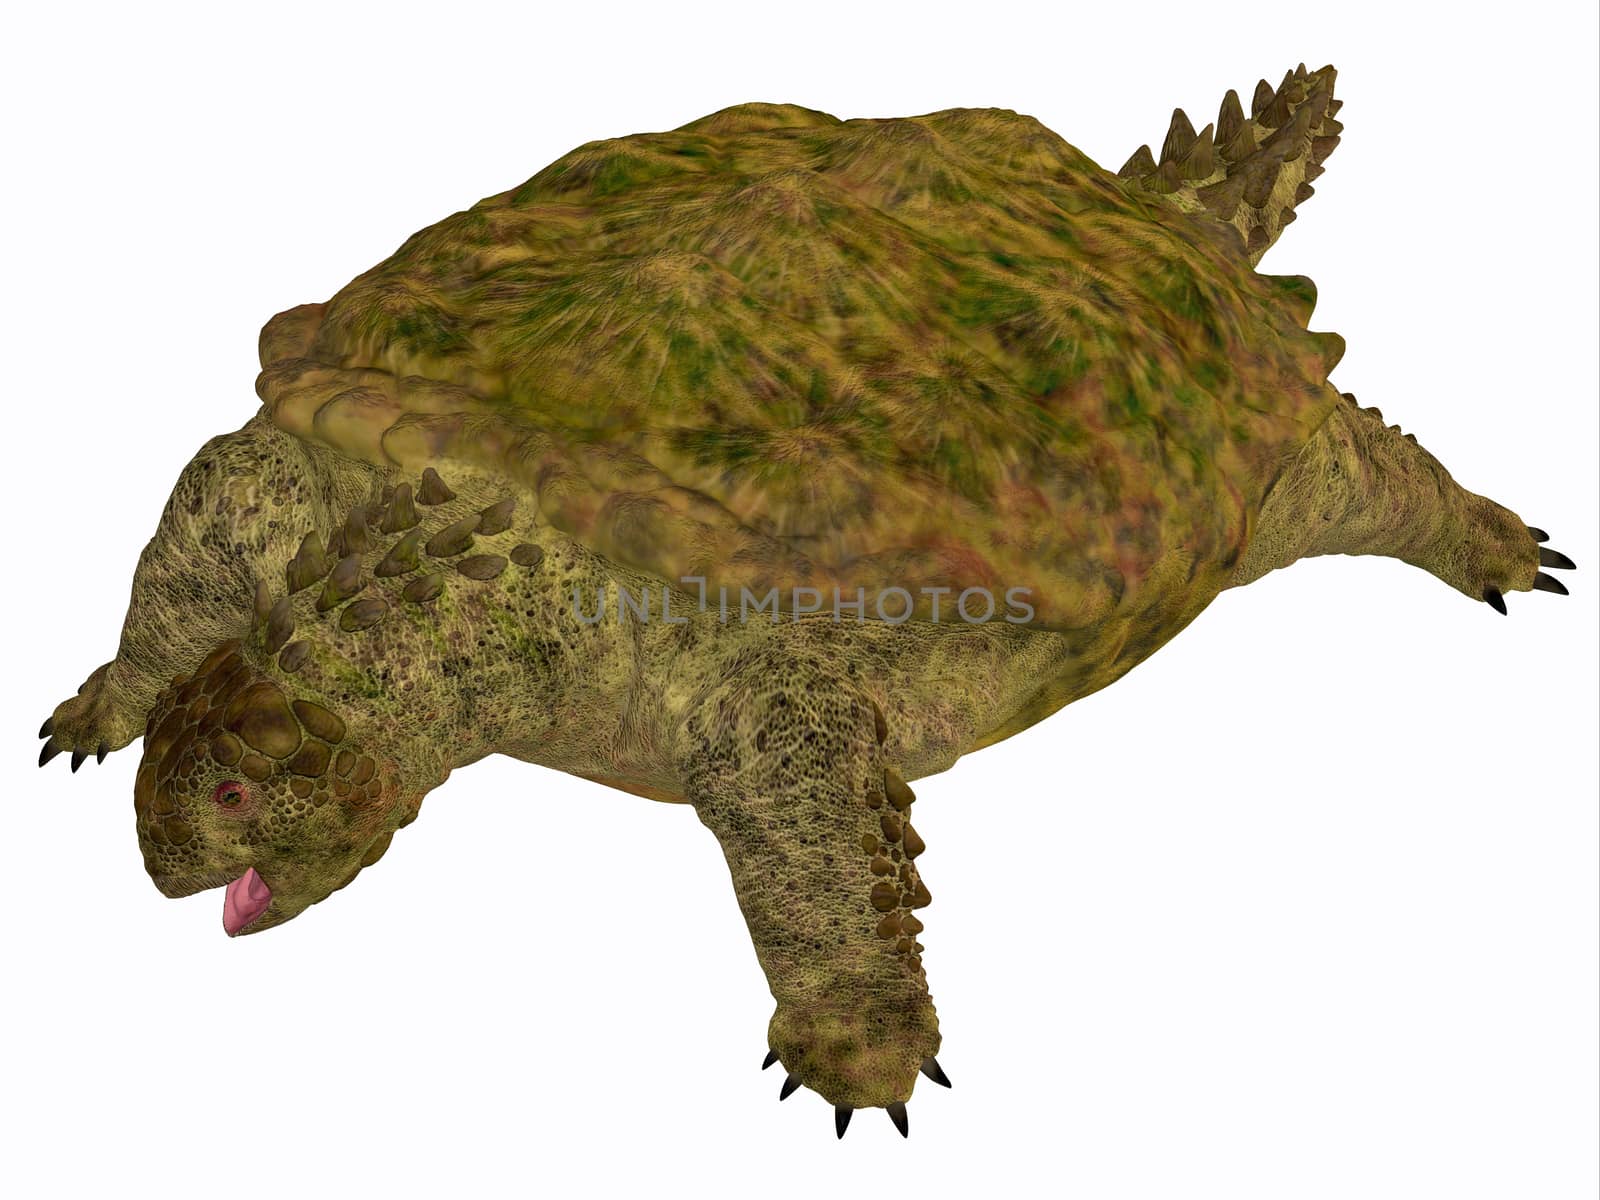 Proganochelys is the second oldest turtle species discovered and lived in Germany and Thailand in the Triassic Period.